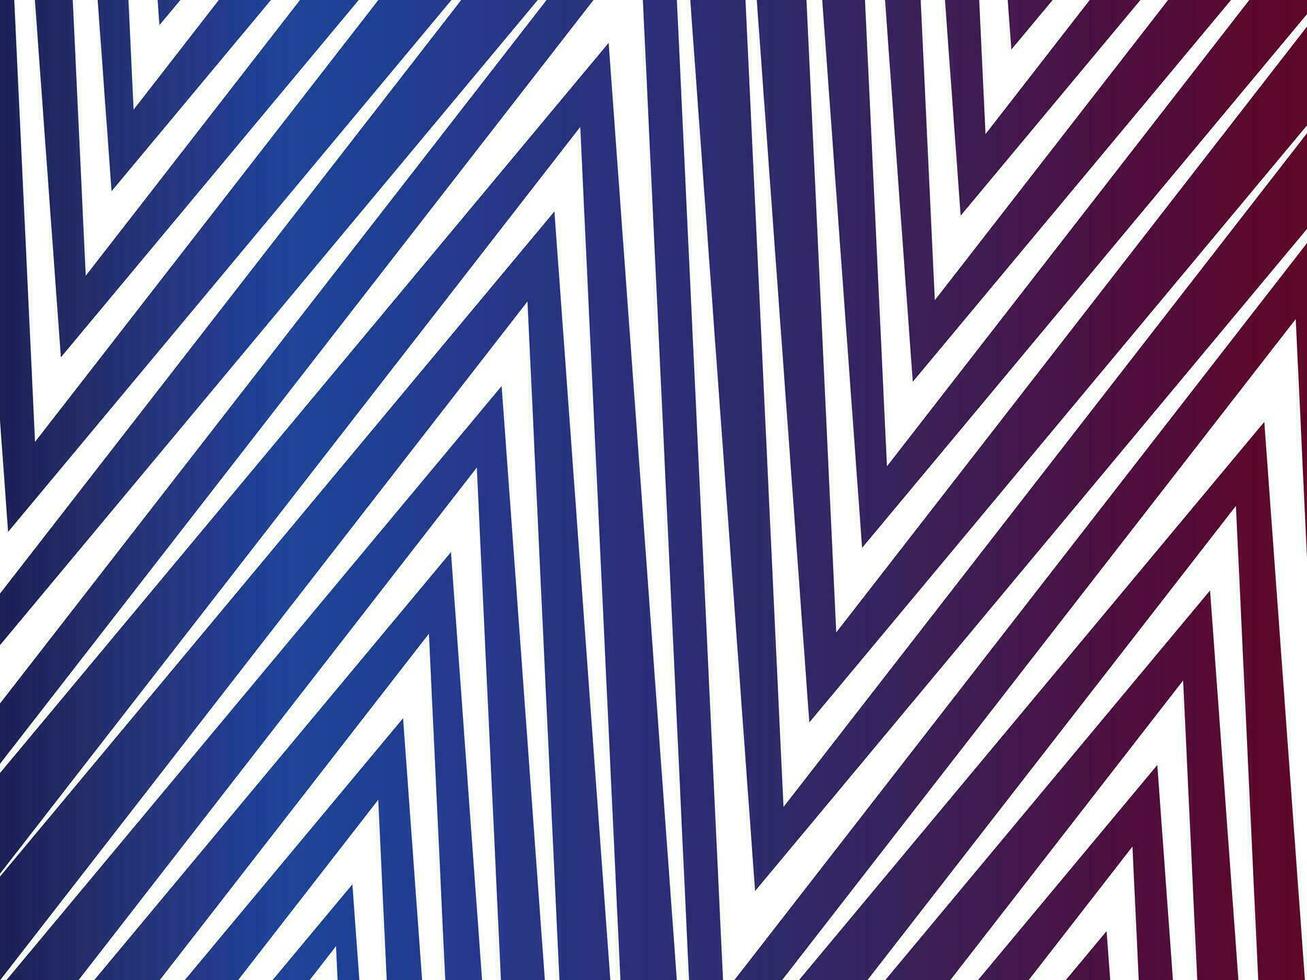 Zig zag white triangle pattern vector decorative background isolated on dark blue and red gradient horizontal template. Simple flat concept backdrop wallpaper for social media or poster background.